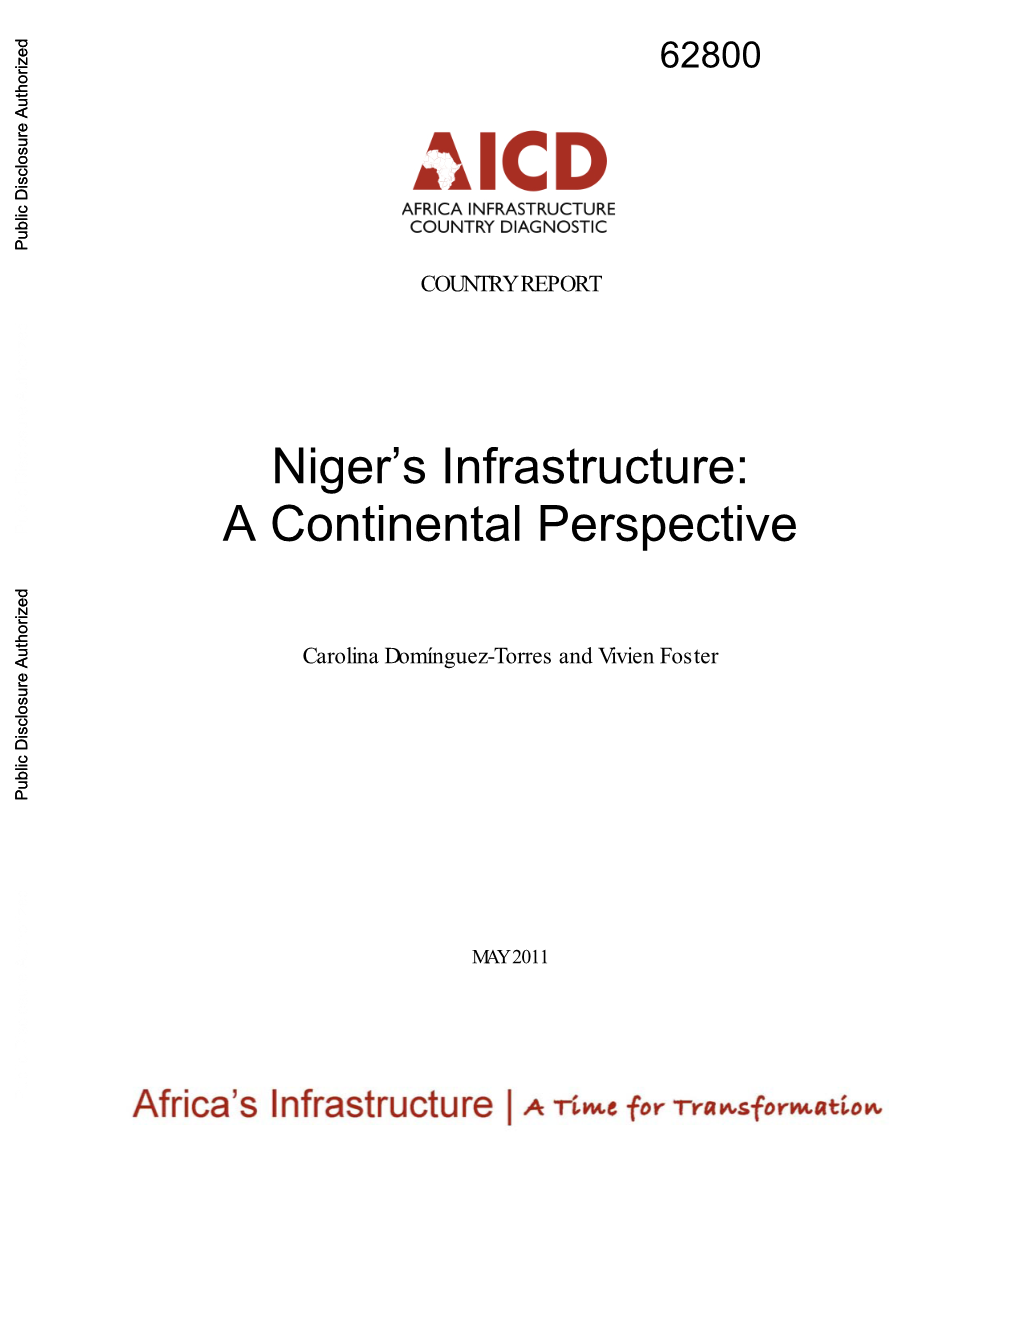 Niger's Infrastructure: a Continental Perspective